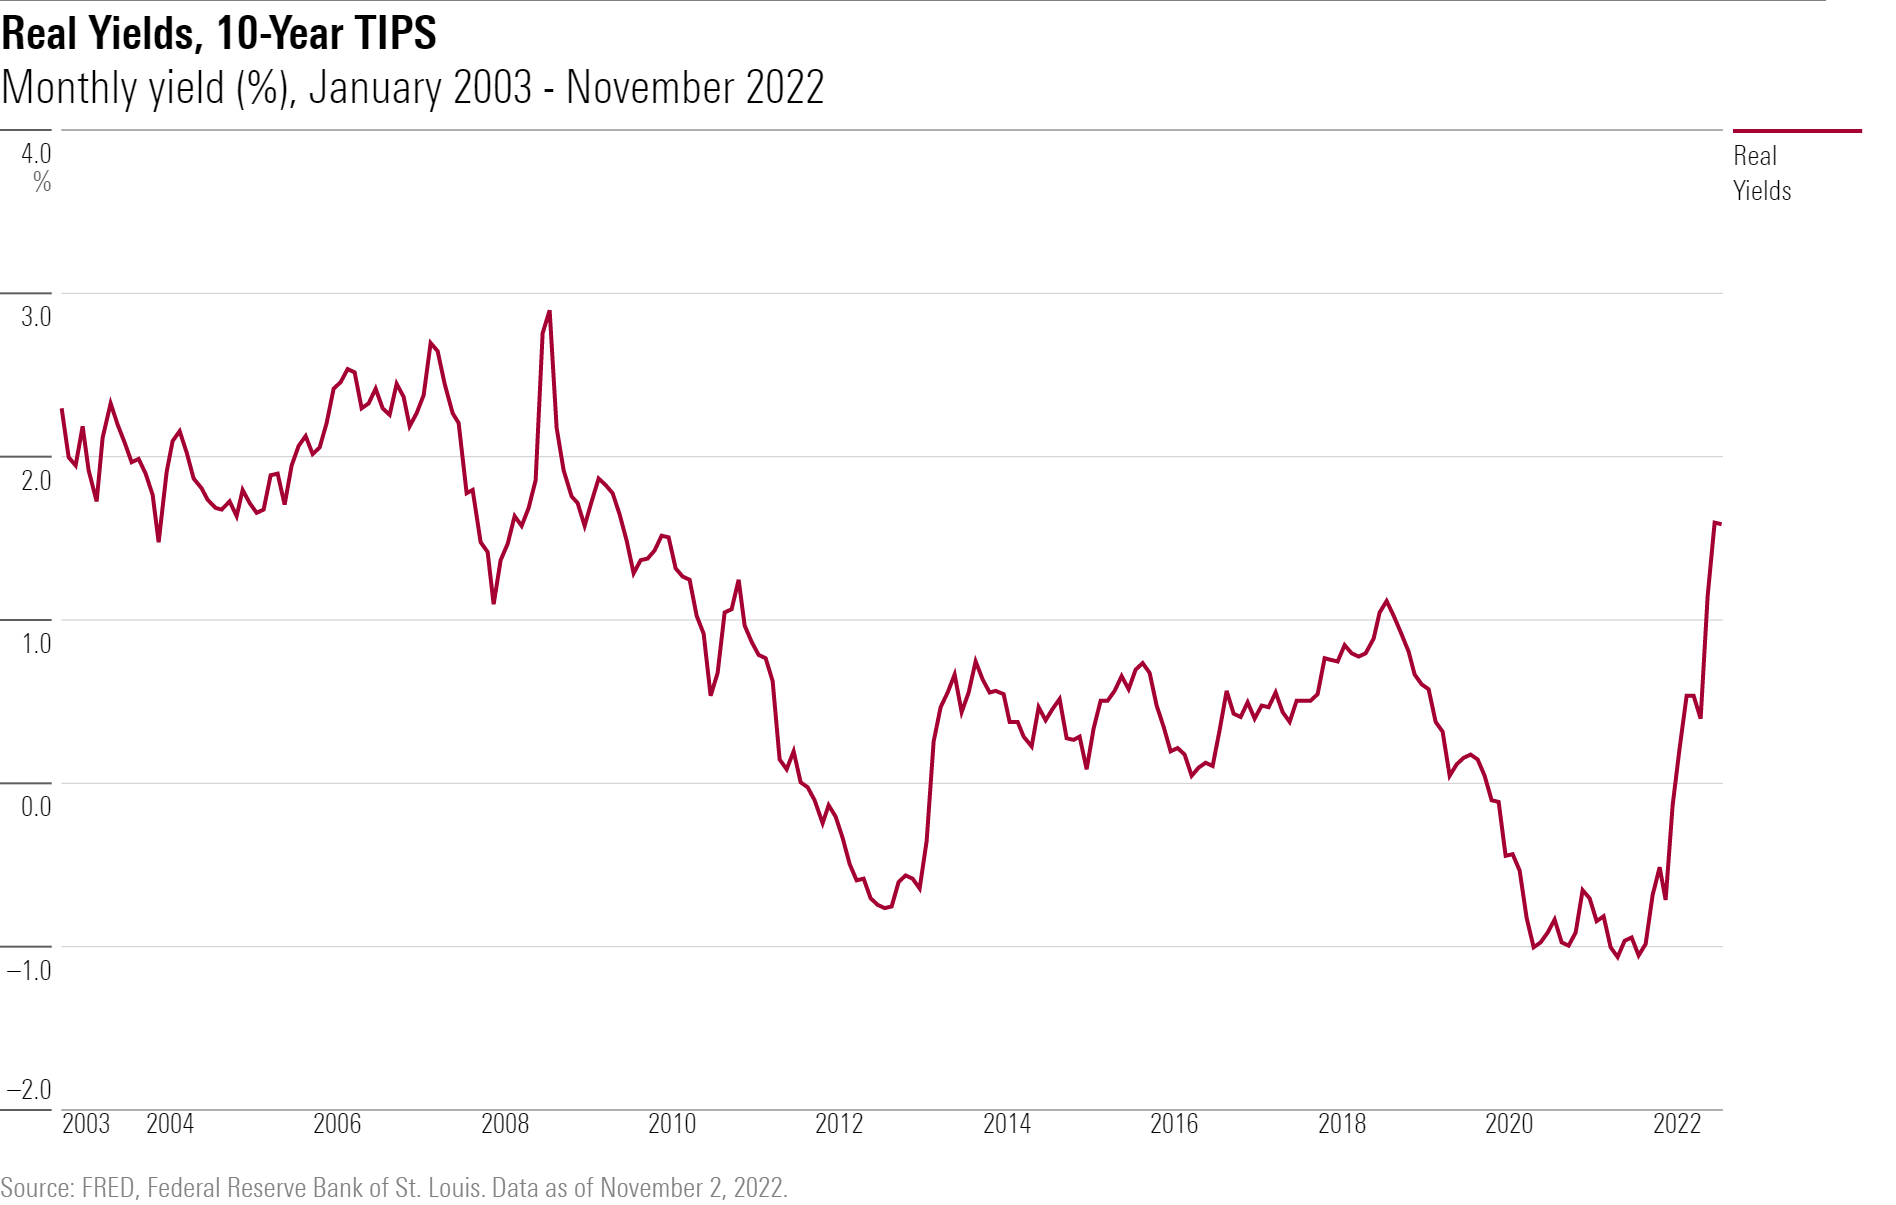 Actual monthly returns on 10-year tips from January 2003 to November 2022